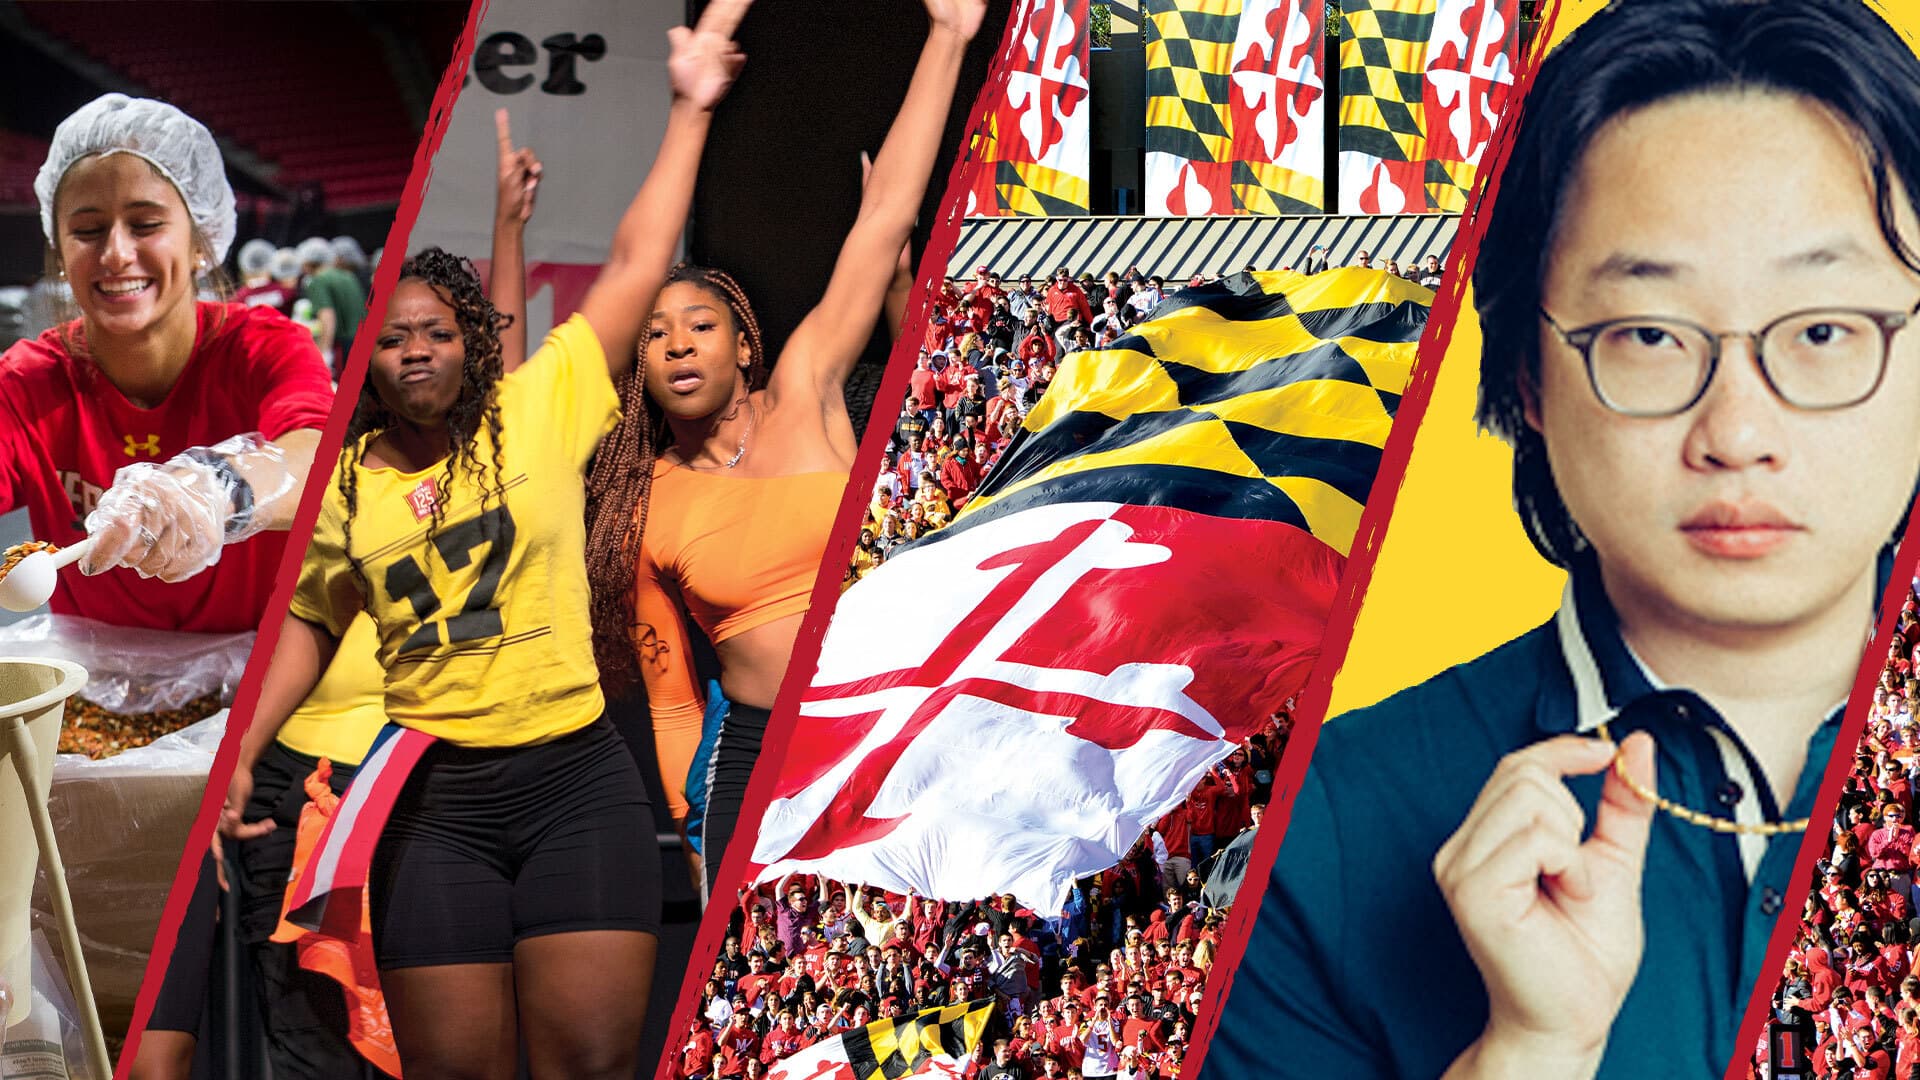 Homecoming collage: Terps Against Hunger students, Juke Joint, flag at football game, Jimmy O. Yang